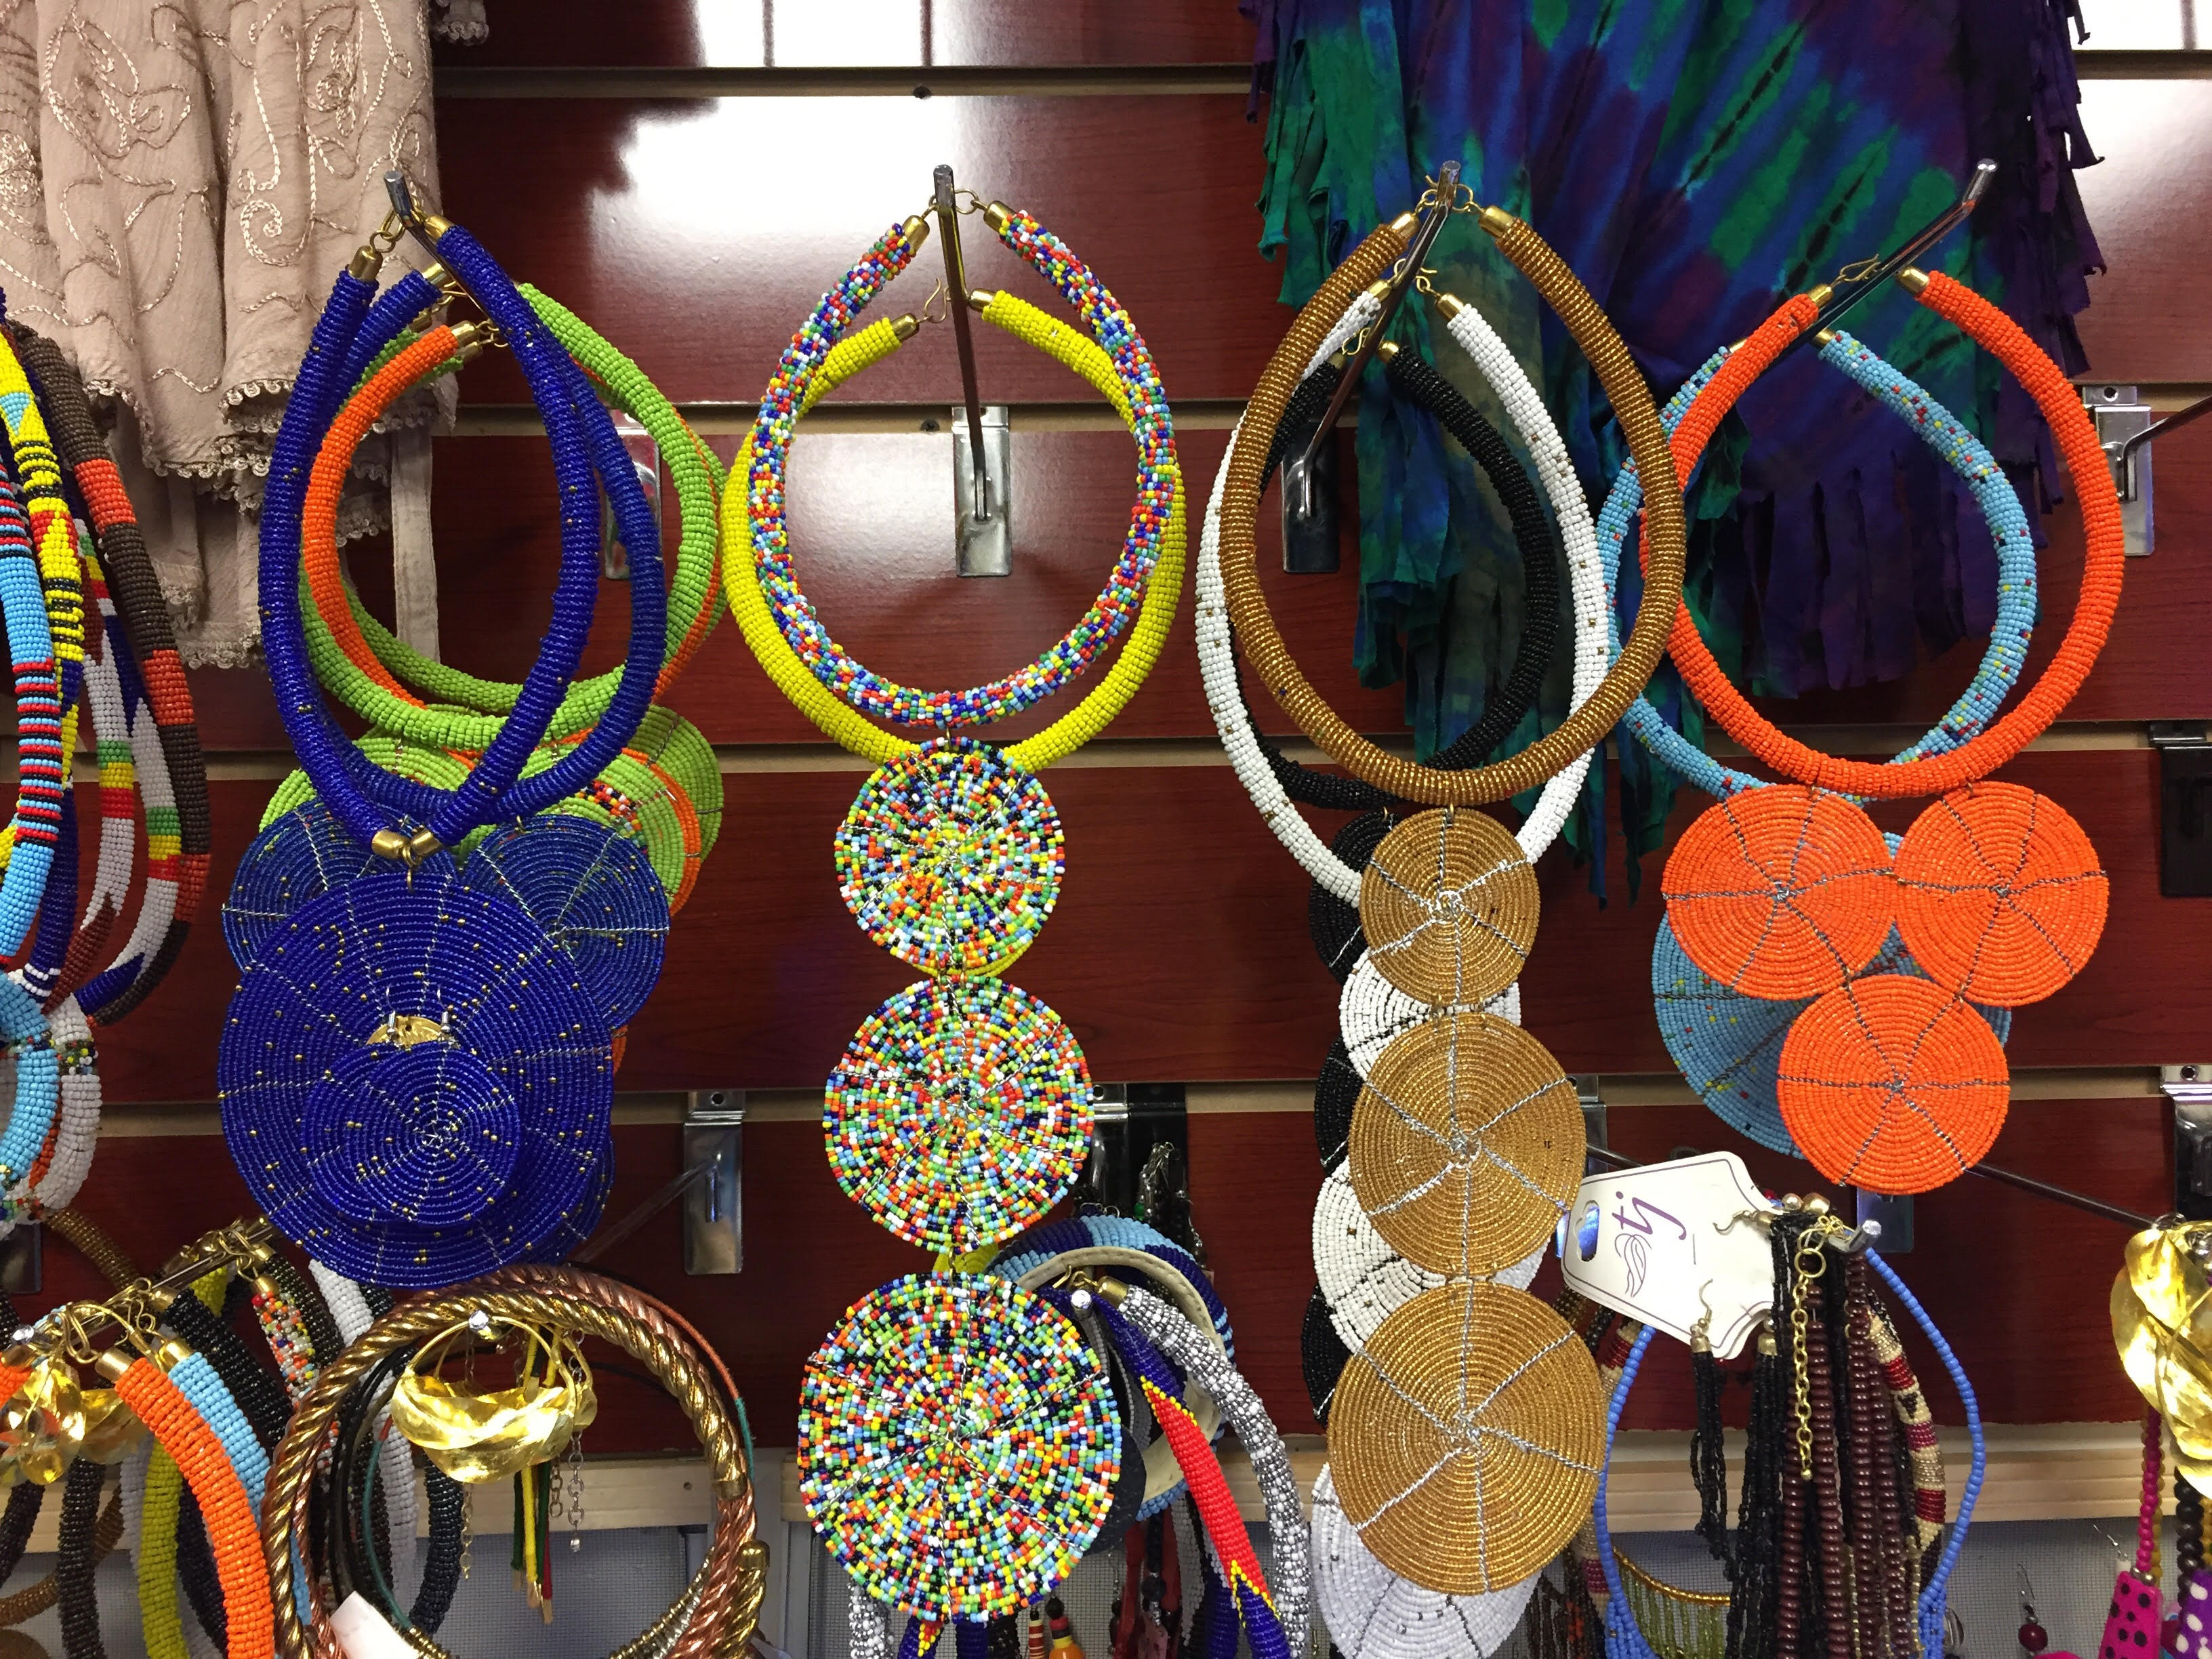 African jewelry and accessories available for purchase at African Kingdom, which opened in October 2018. (Submitted)